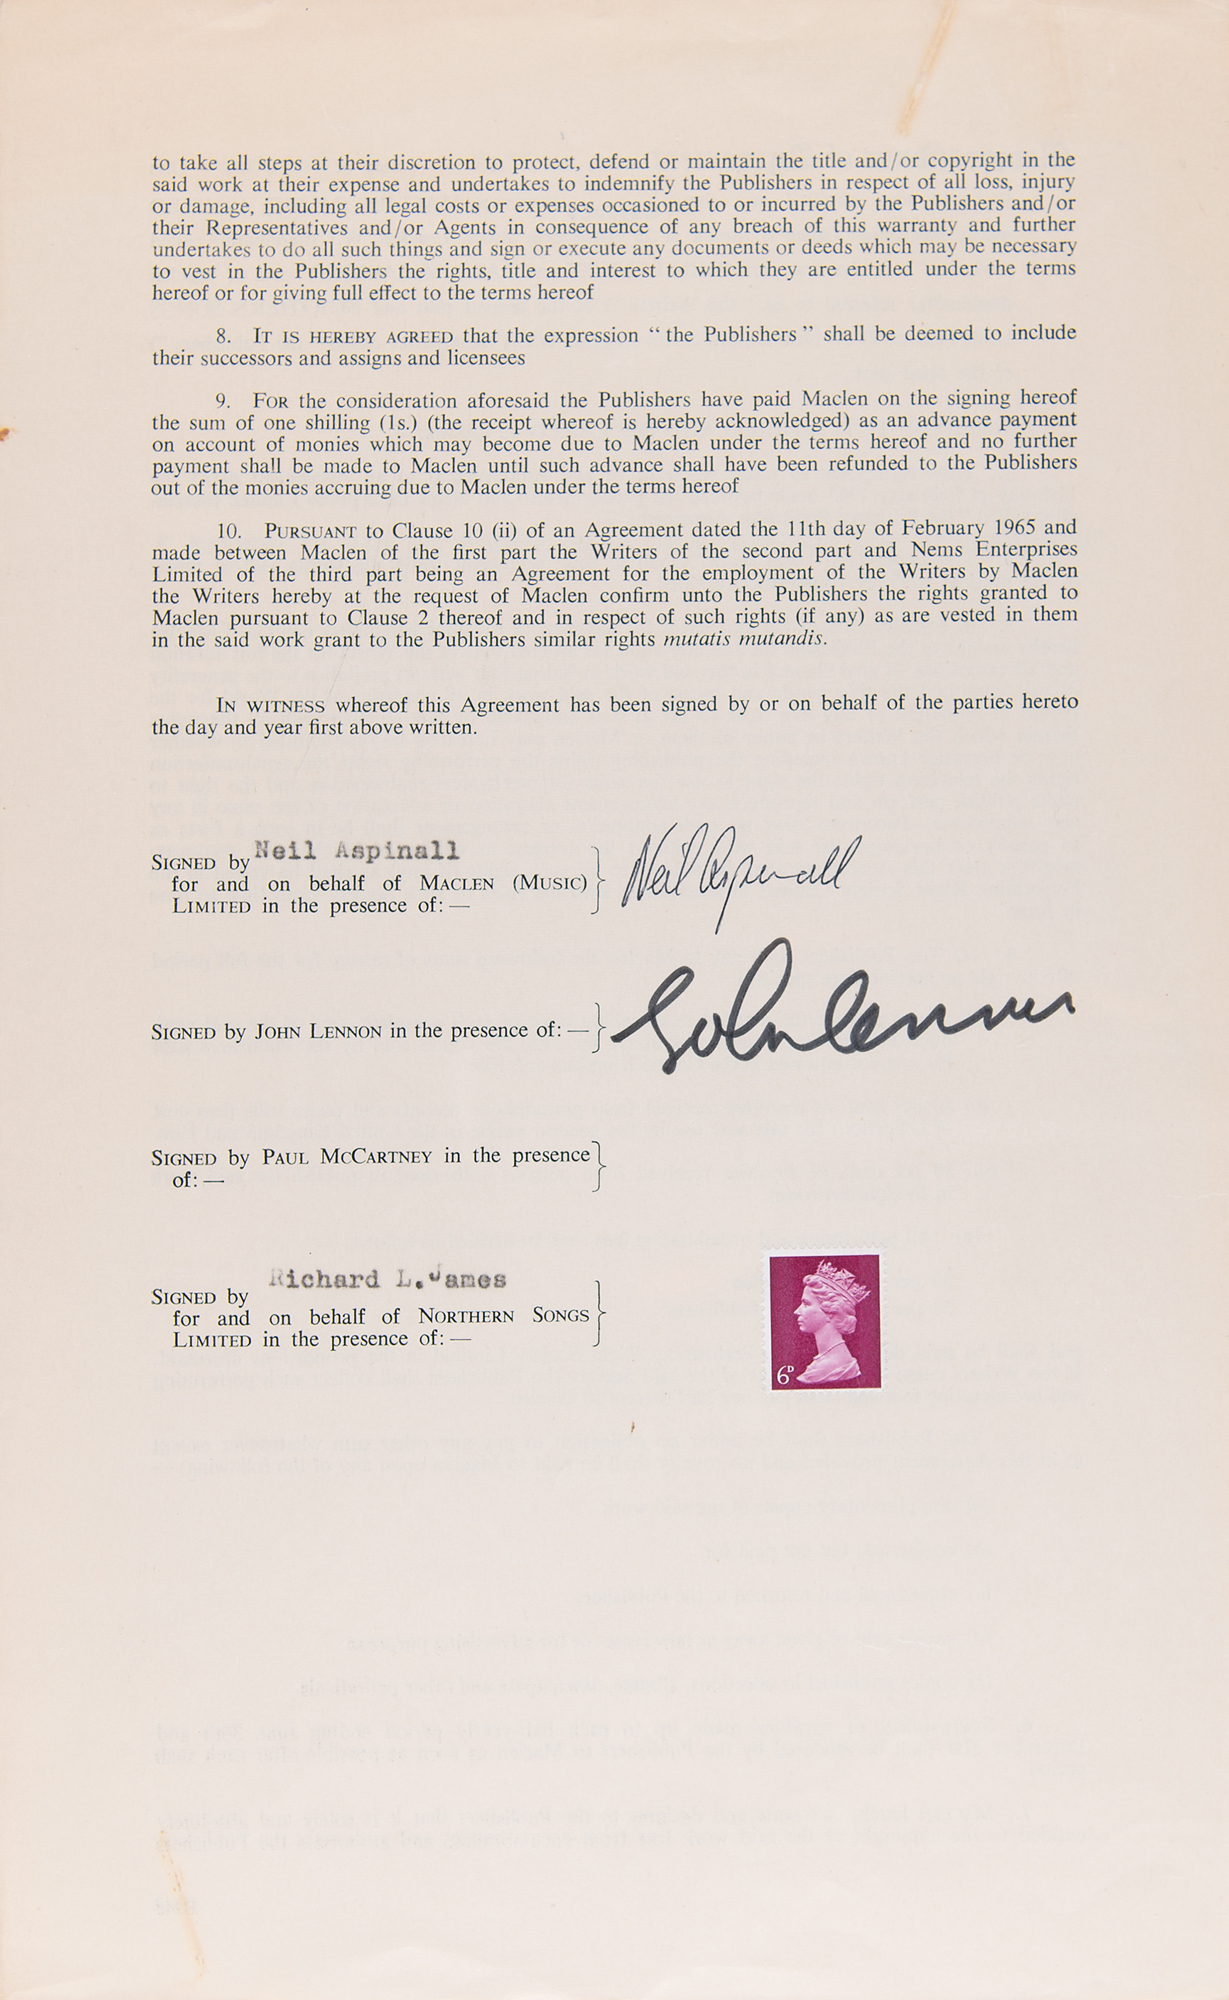 Beatles: John Lennon Document Signed, Assigning Copyright for a